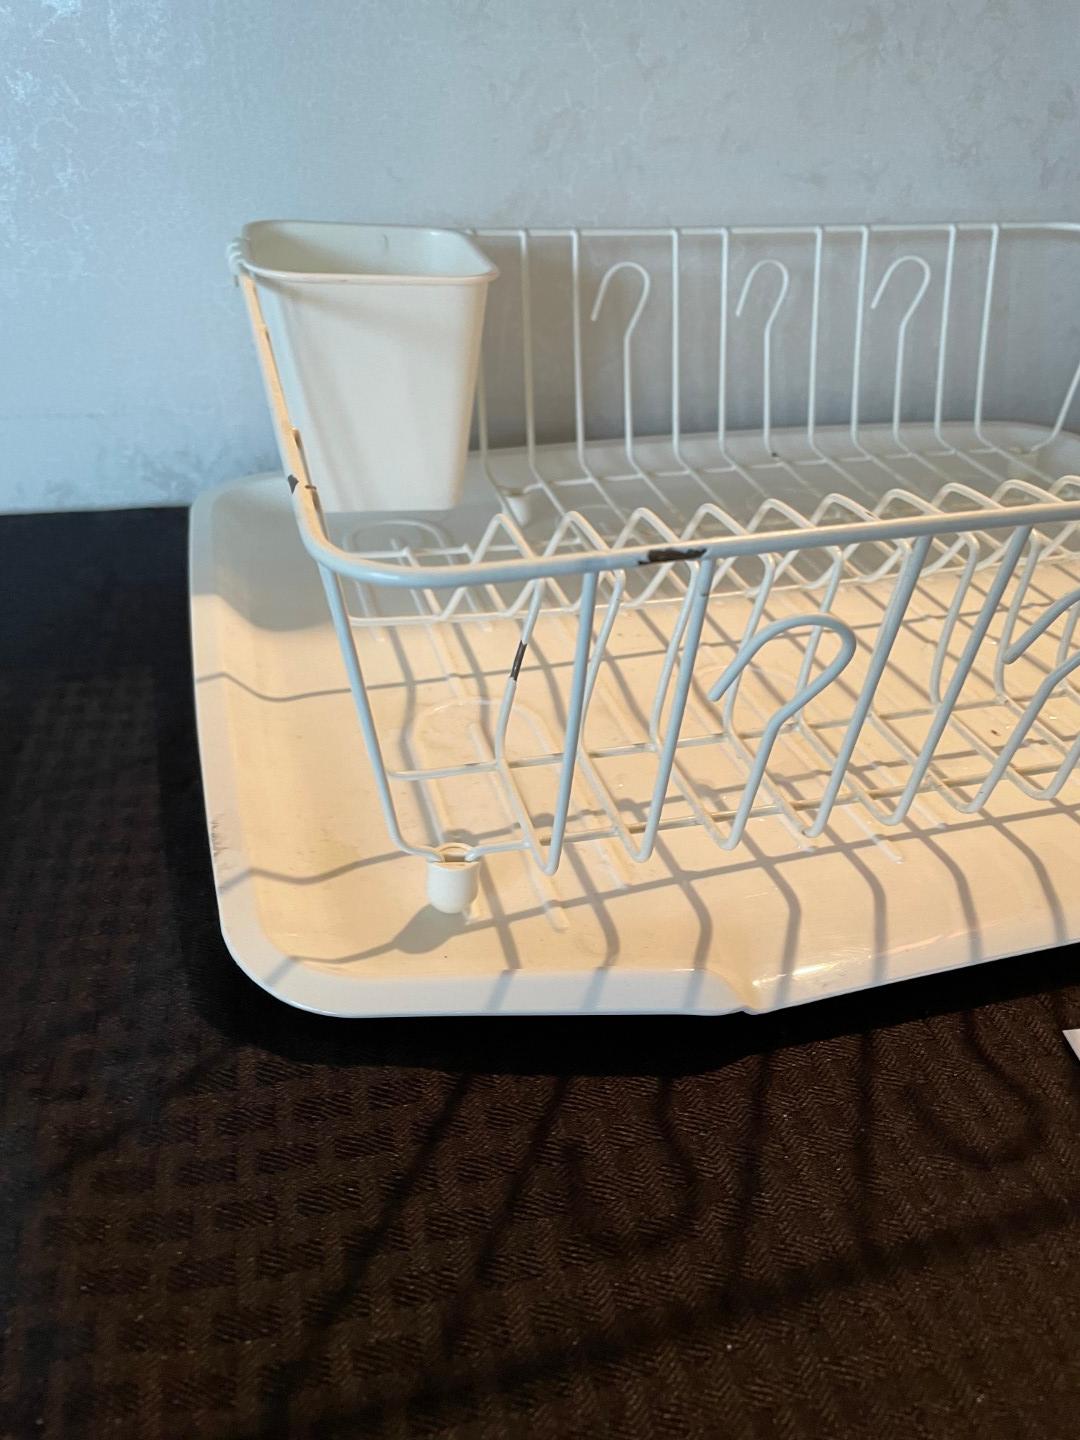 Kitchen tray drying rack for plates etc…